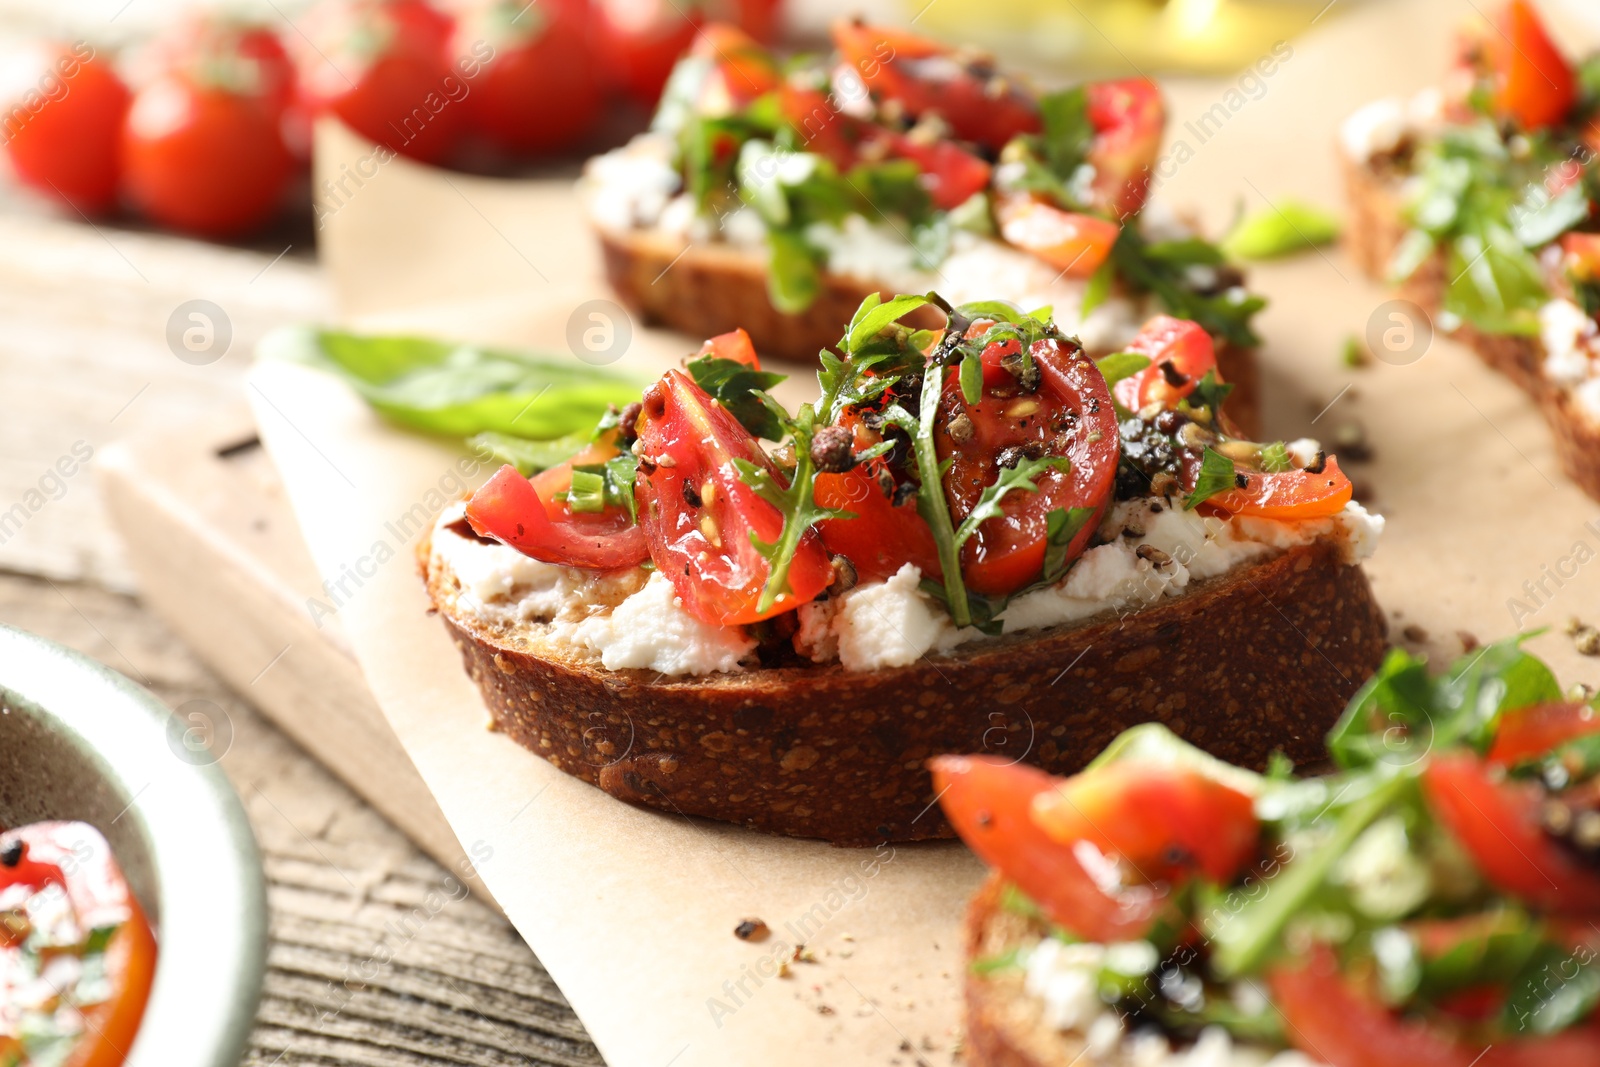 Photo of Delicious ricotta bruschettas with tomatoes, arugula and basil on wooden table, closeup